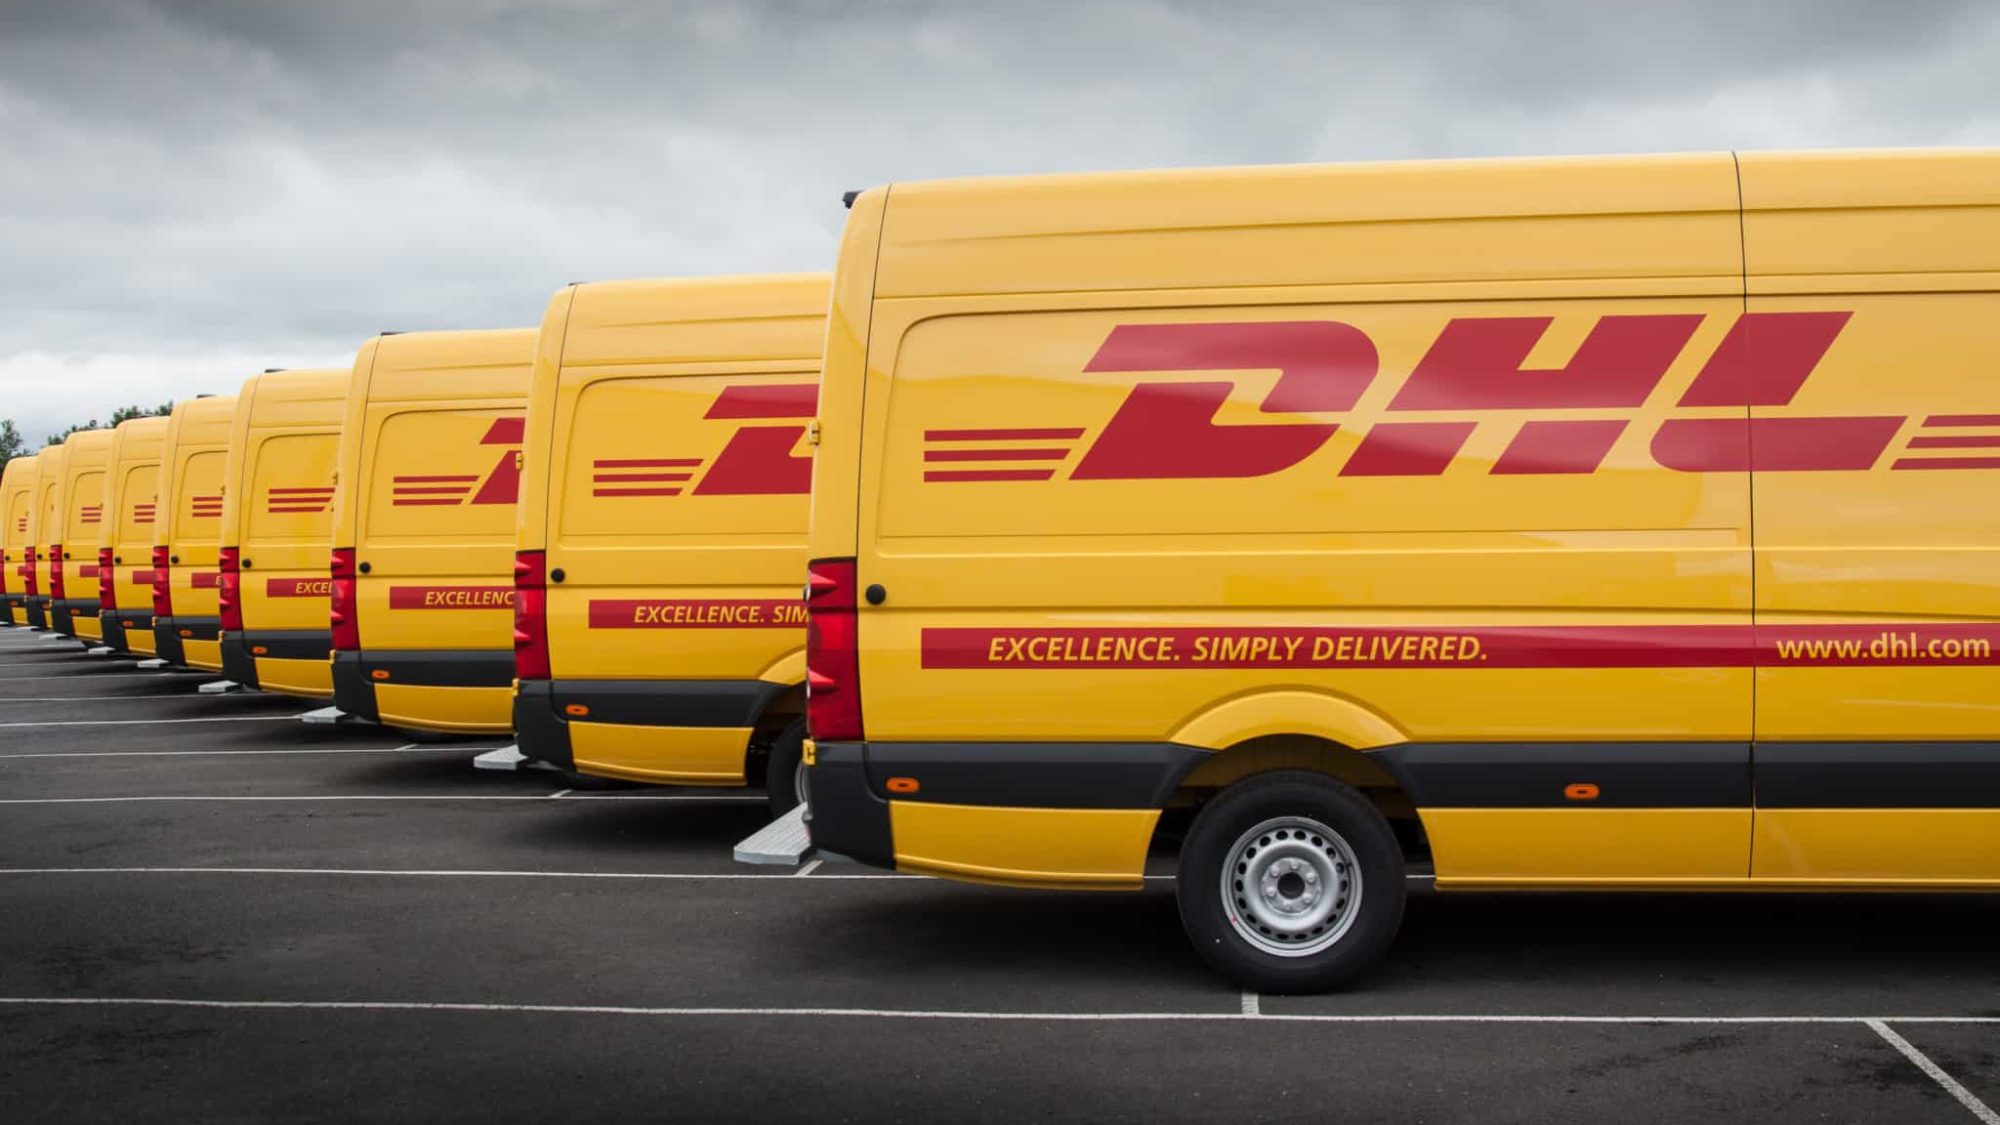 DHL to take Pass My Parcel business